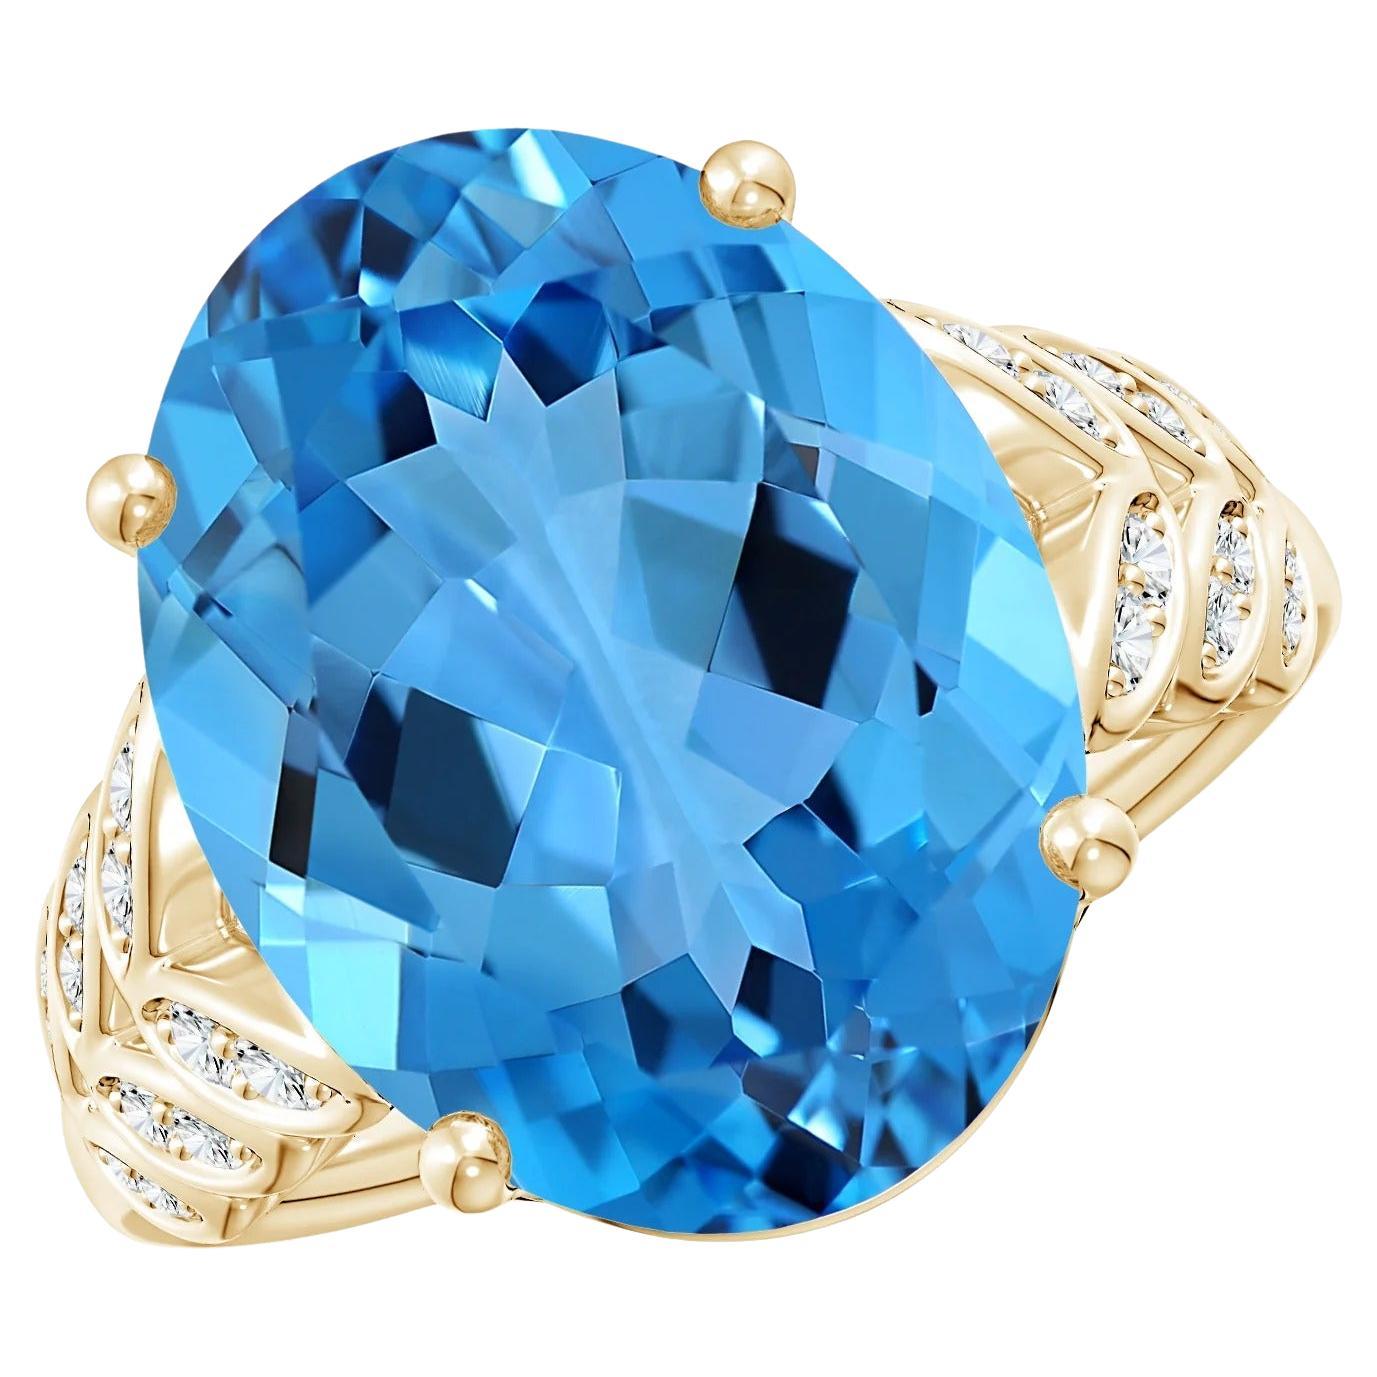 GIA Certified Natural Swiss Blue Topaz Ring in Yellow Gold with Diamonds